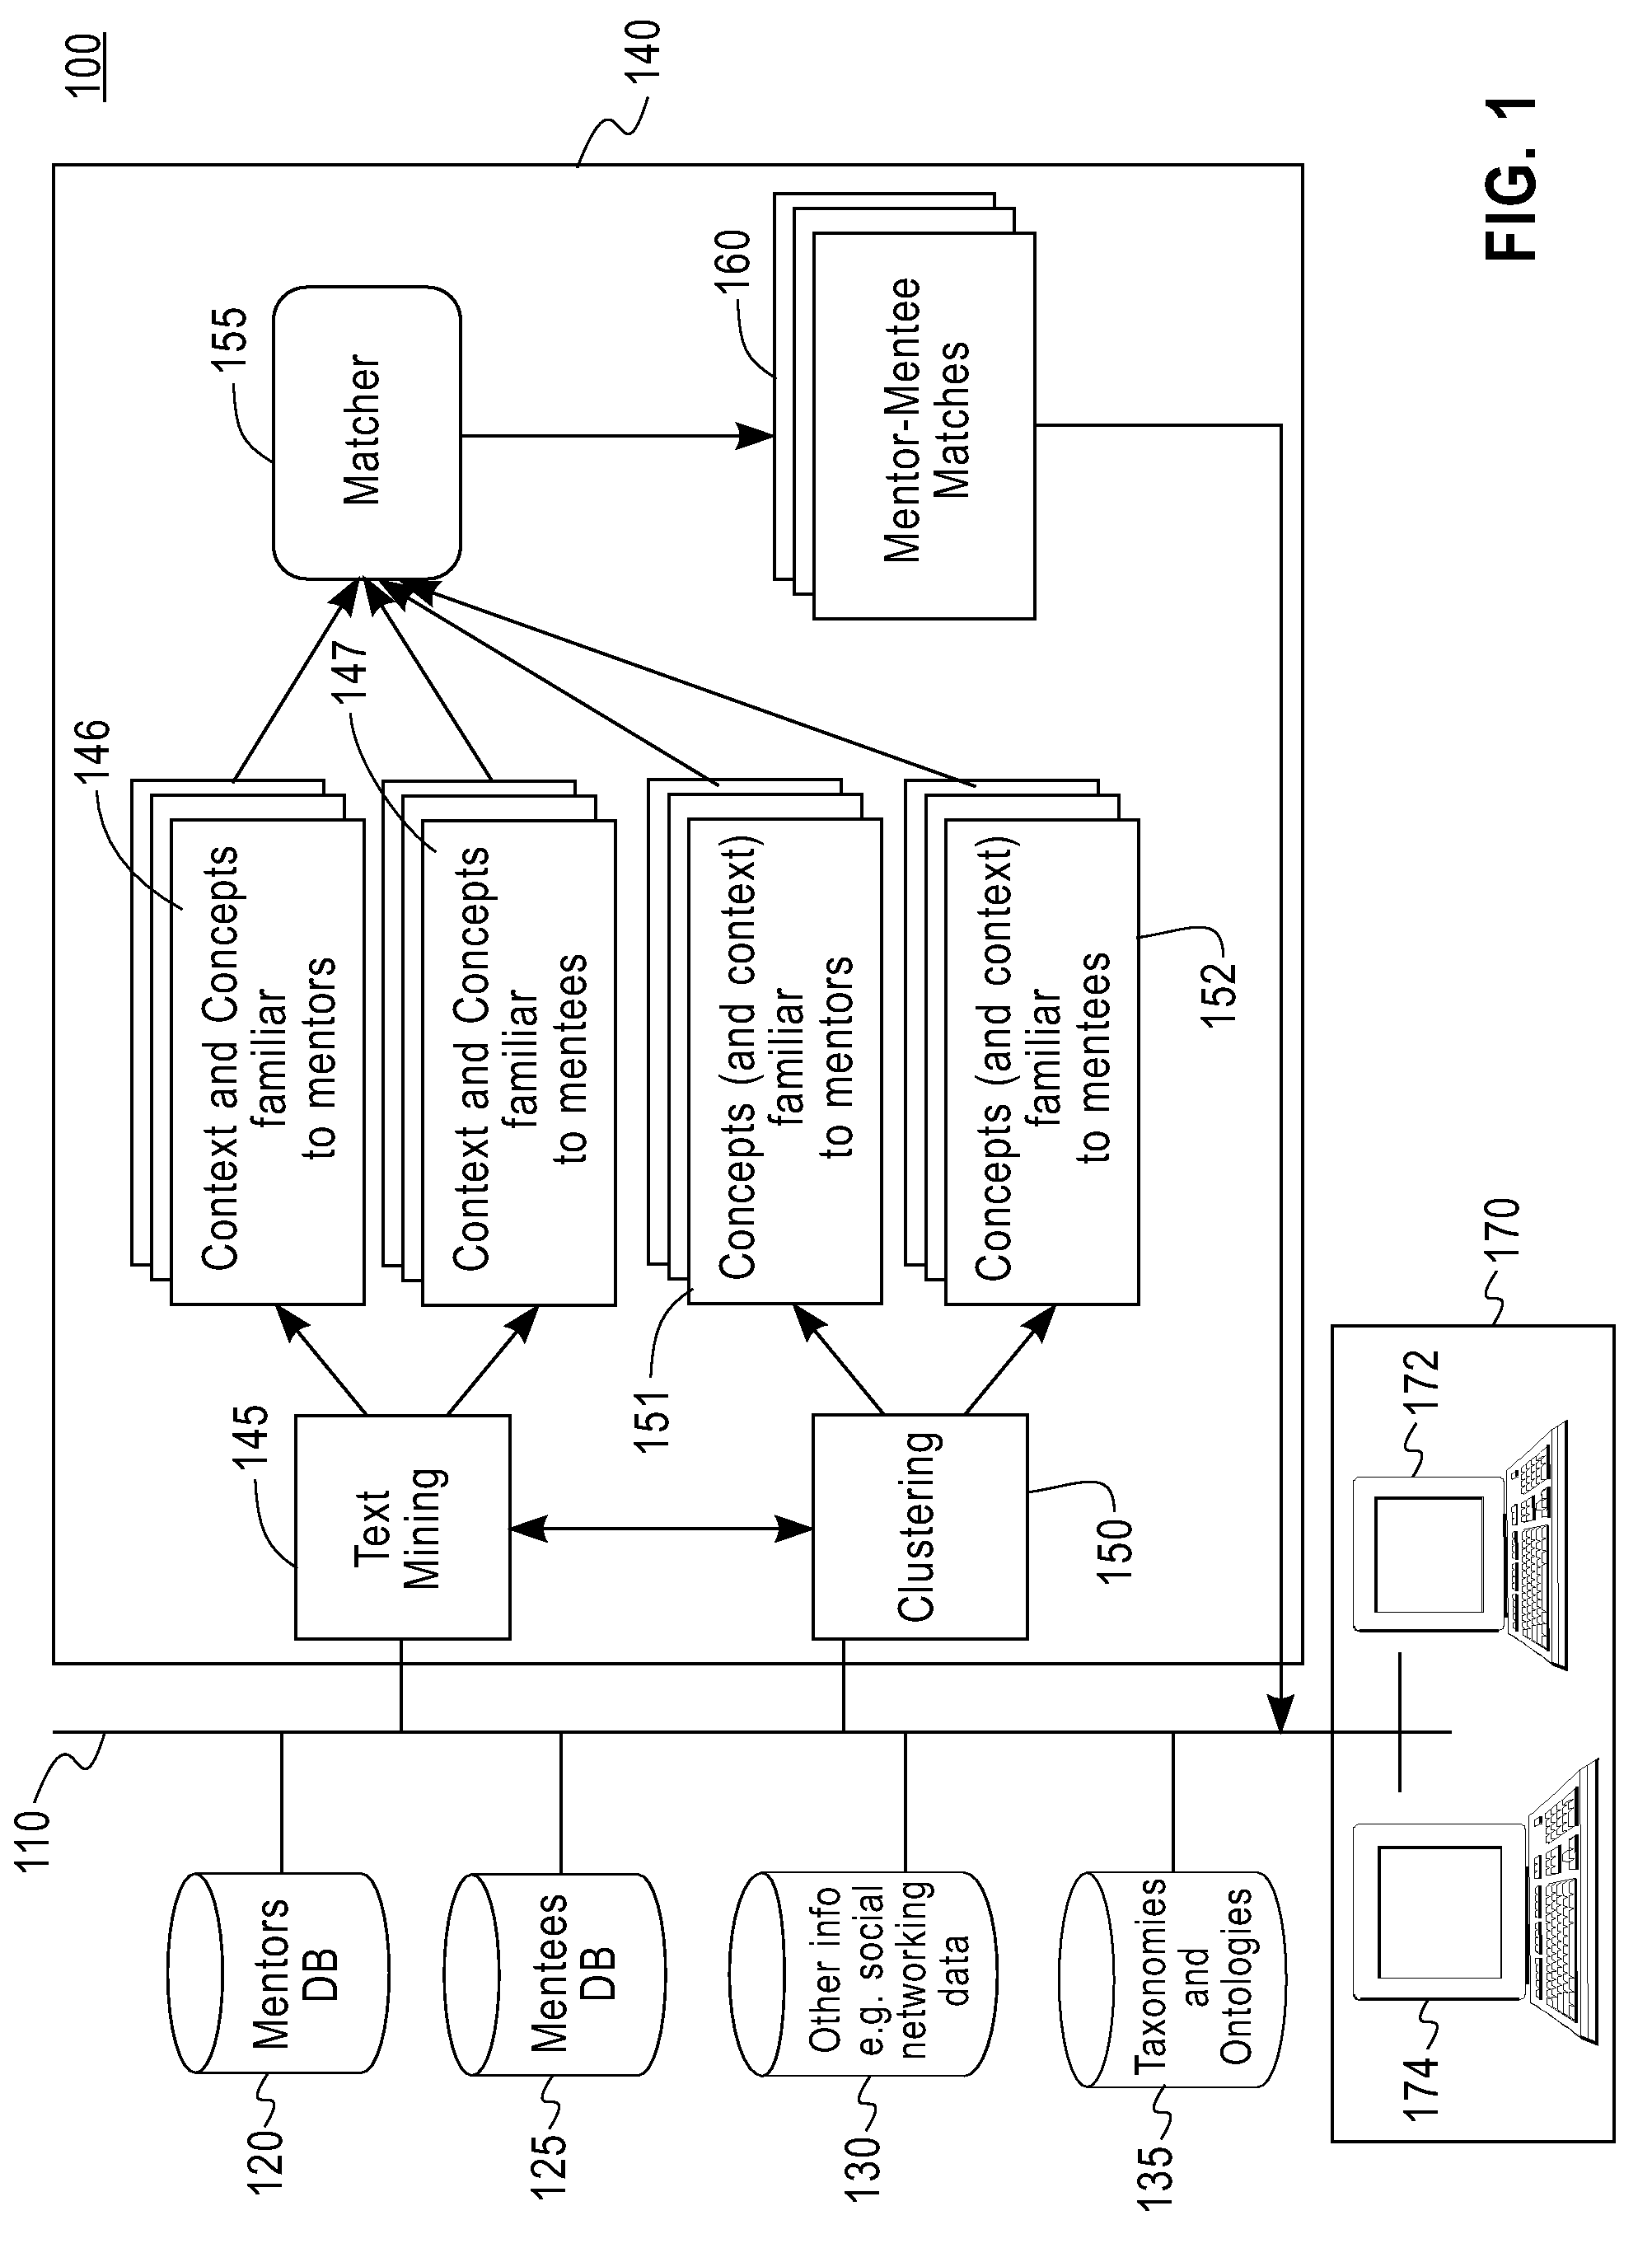 System and method for facilitating skill gap analysis and remediation based on tag analytics